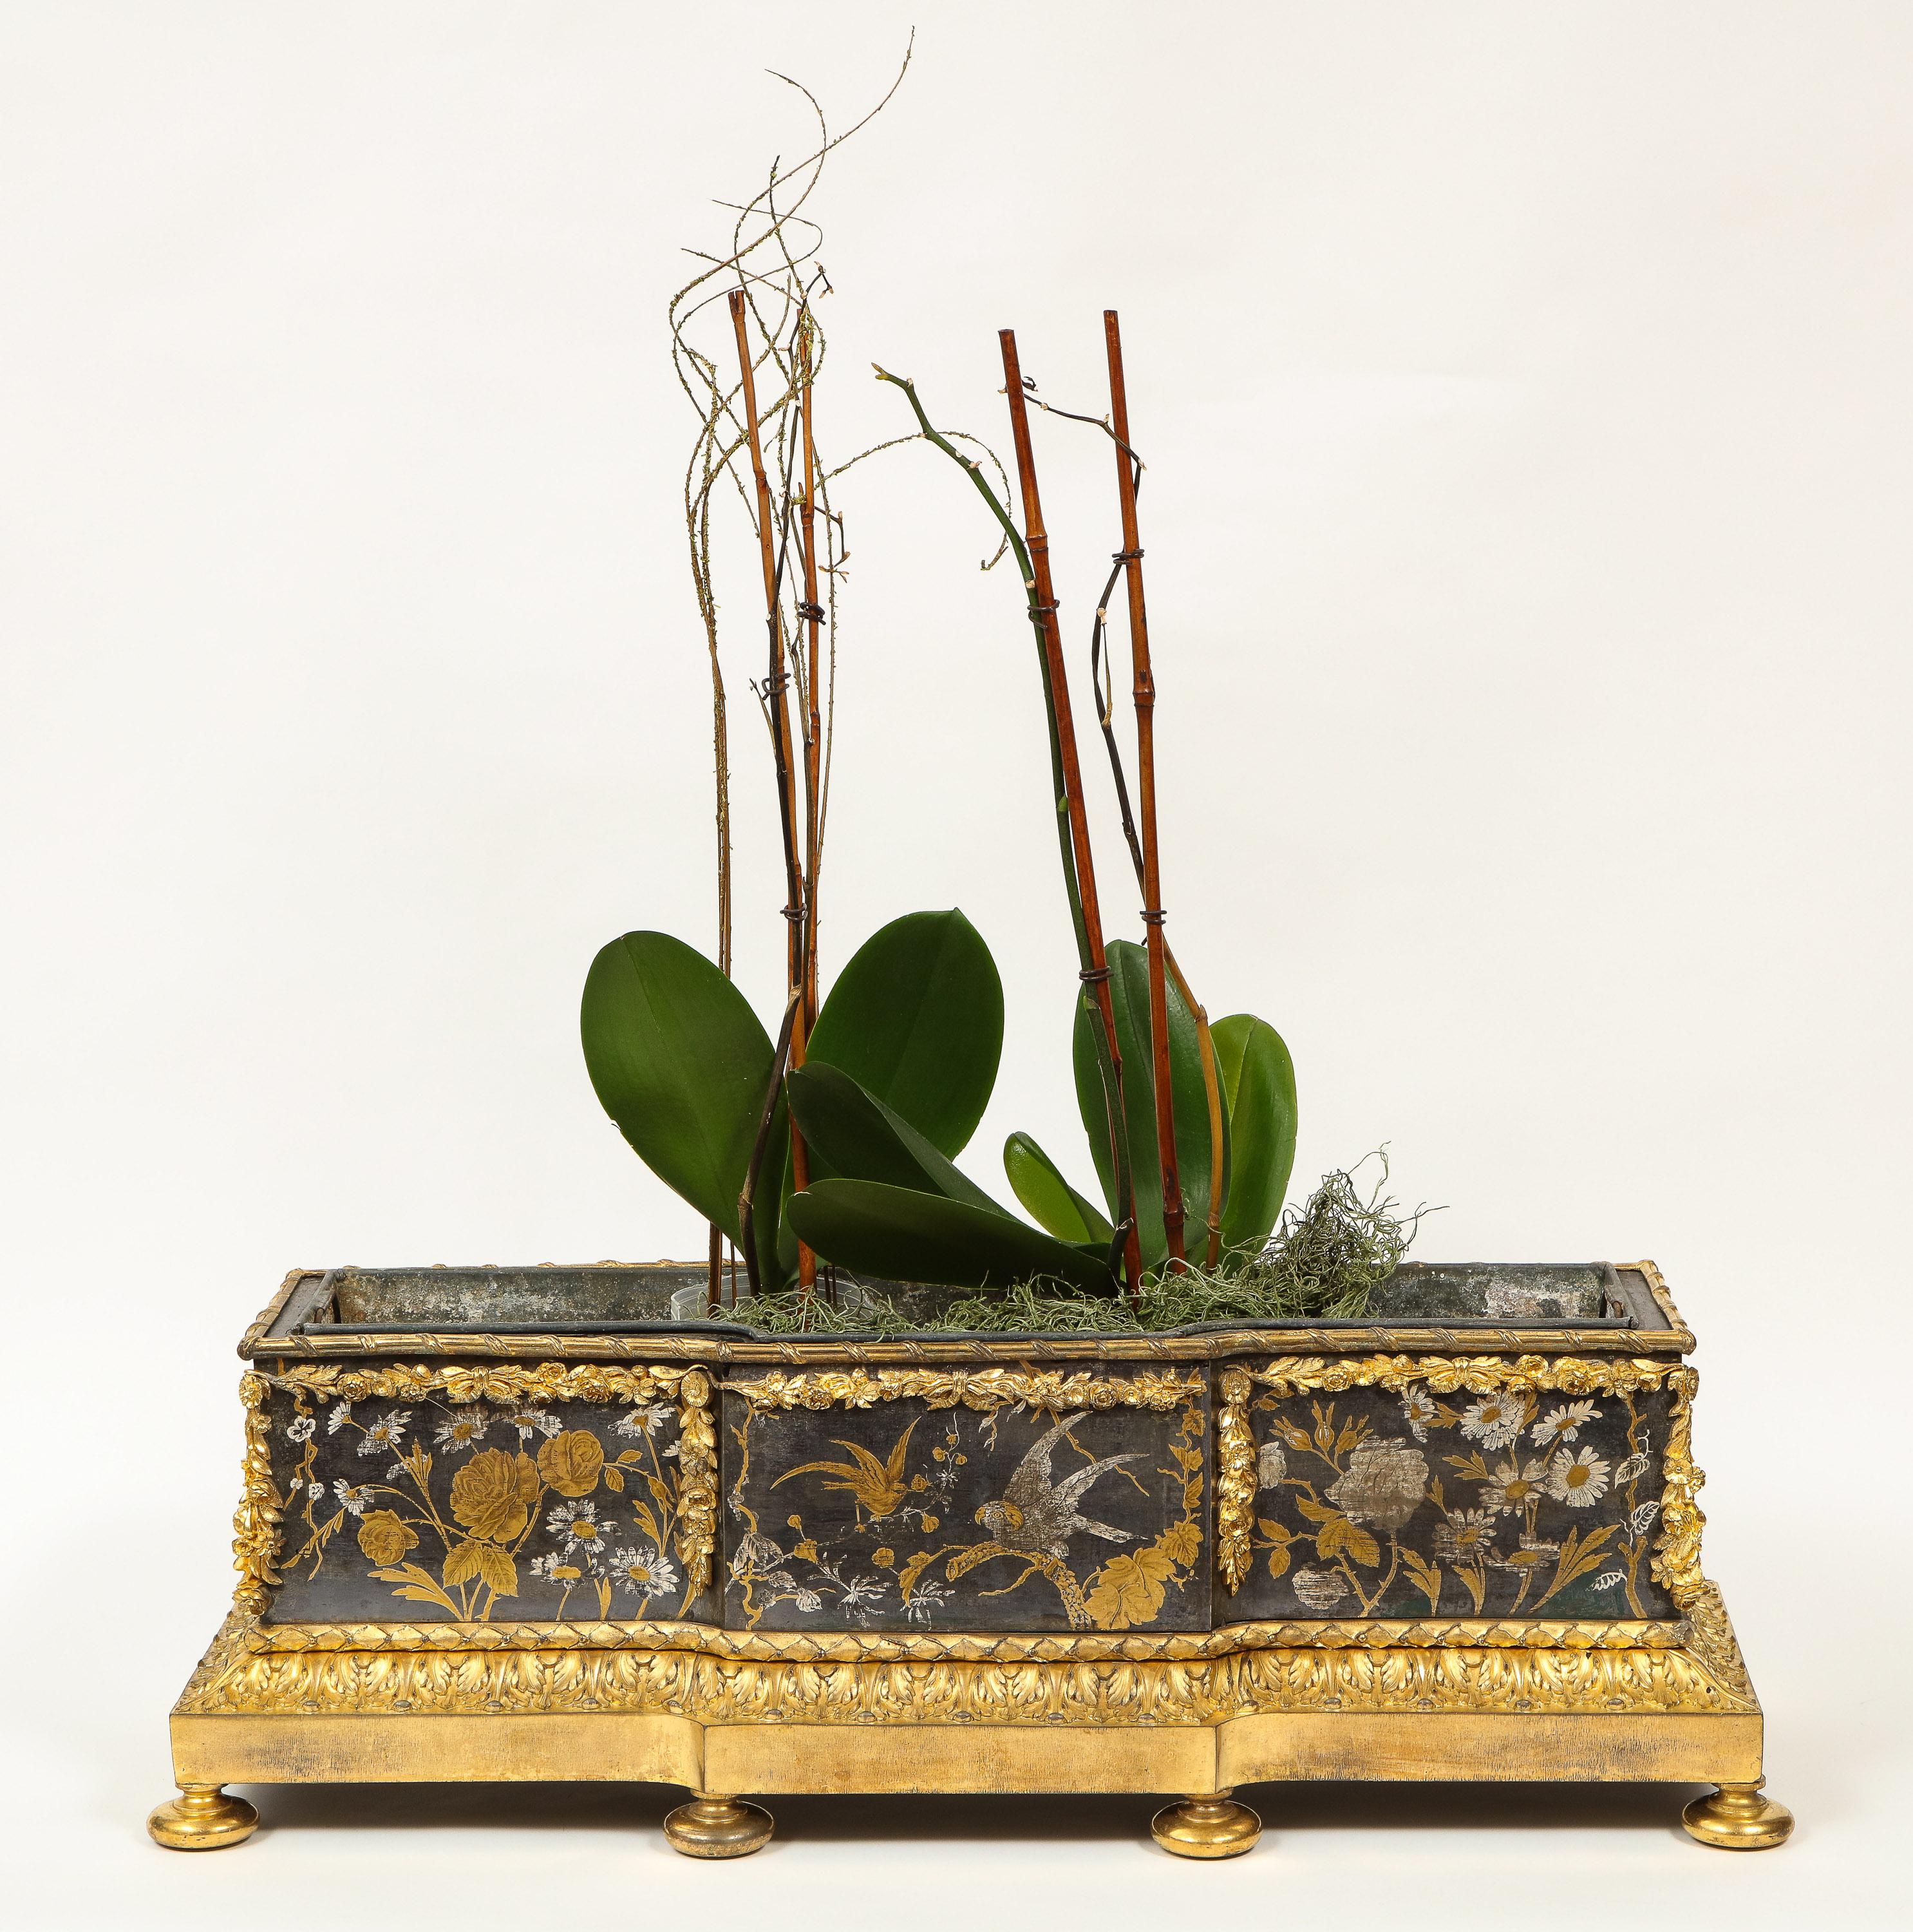 Unusual French Japonisme ormolu-mounted tole jardinière, circa 1870.

Very nice and unusual rectangular jardinière / planter made from the best quality ormolu. Designed with flowers, and birds, in the style of Christofle. 

Original liner